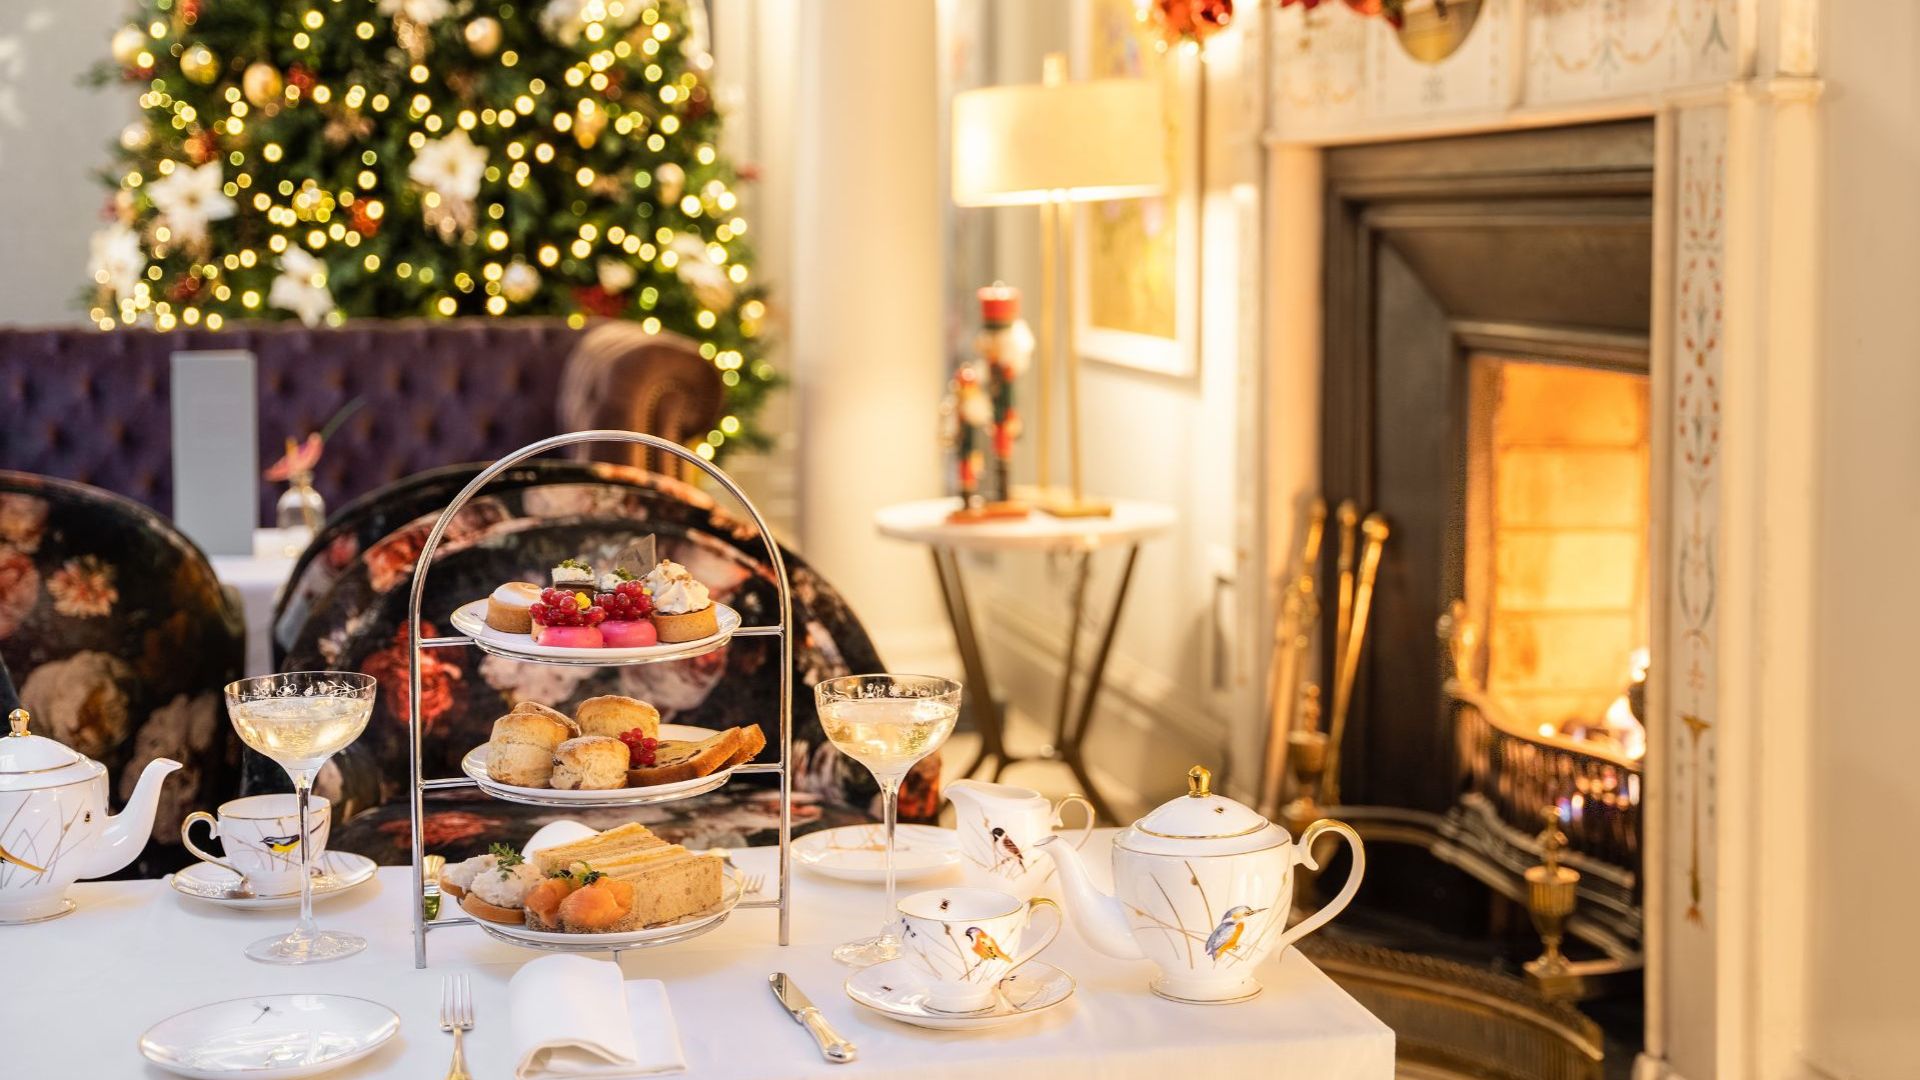 Festive Afternoon Tea at The College Green Hotel Dublin